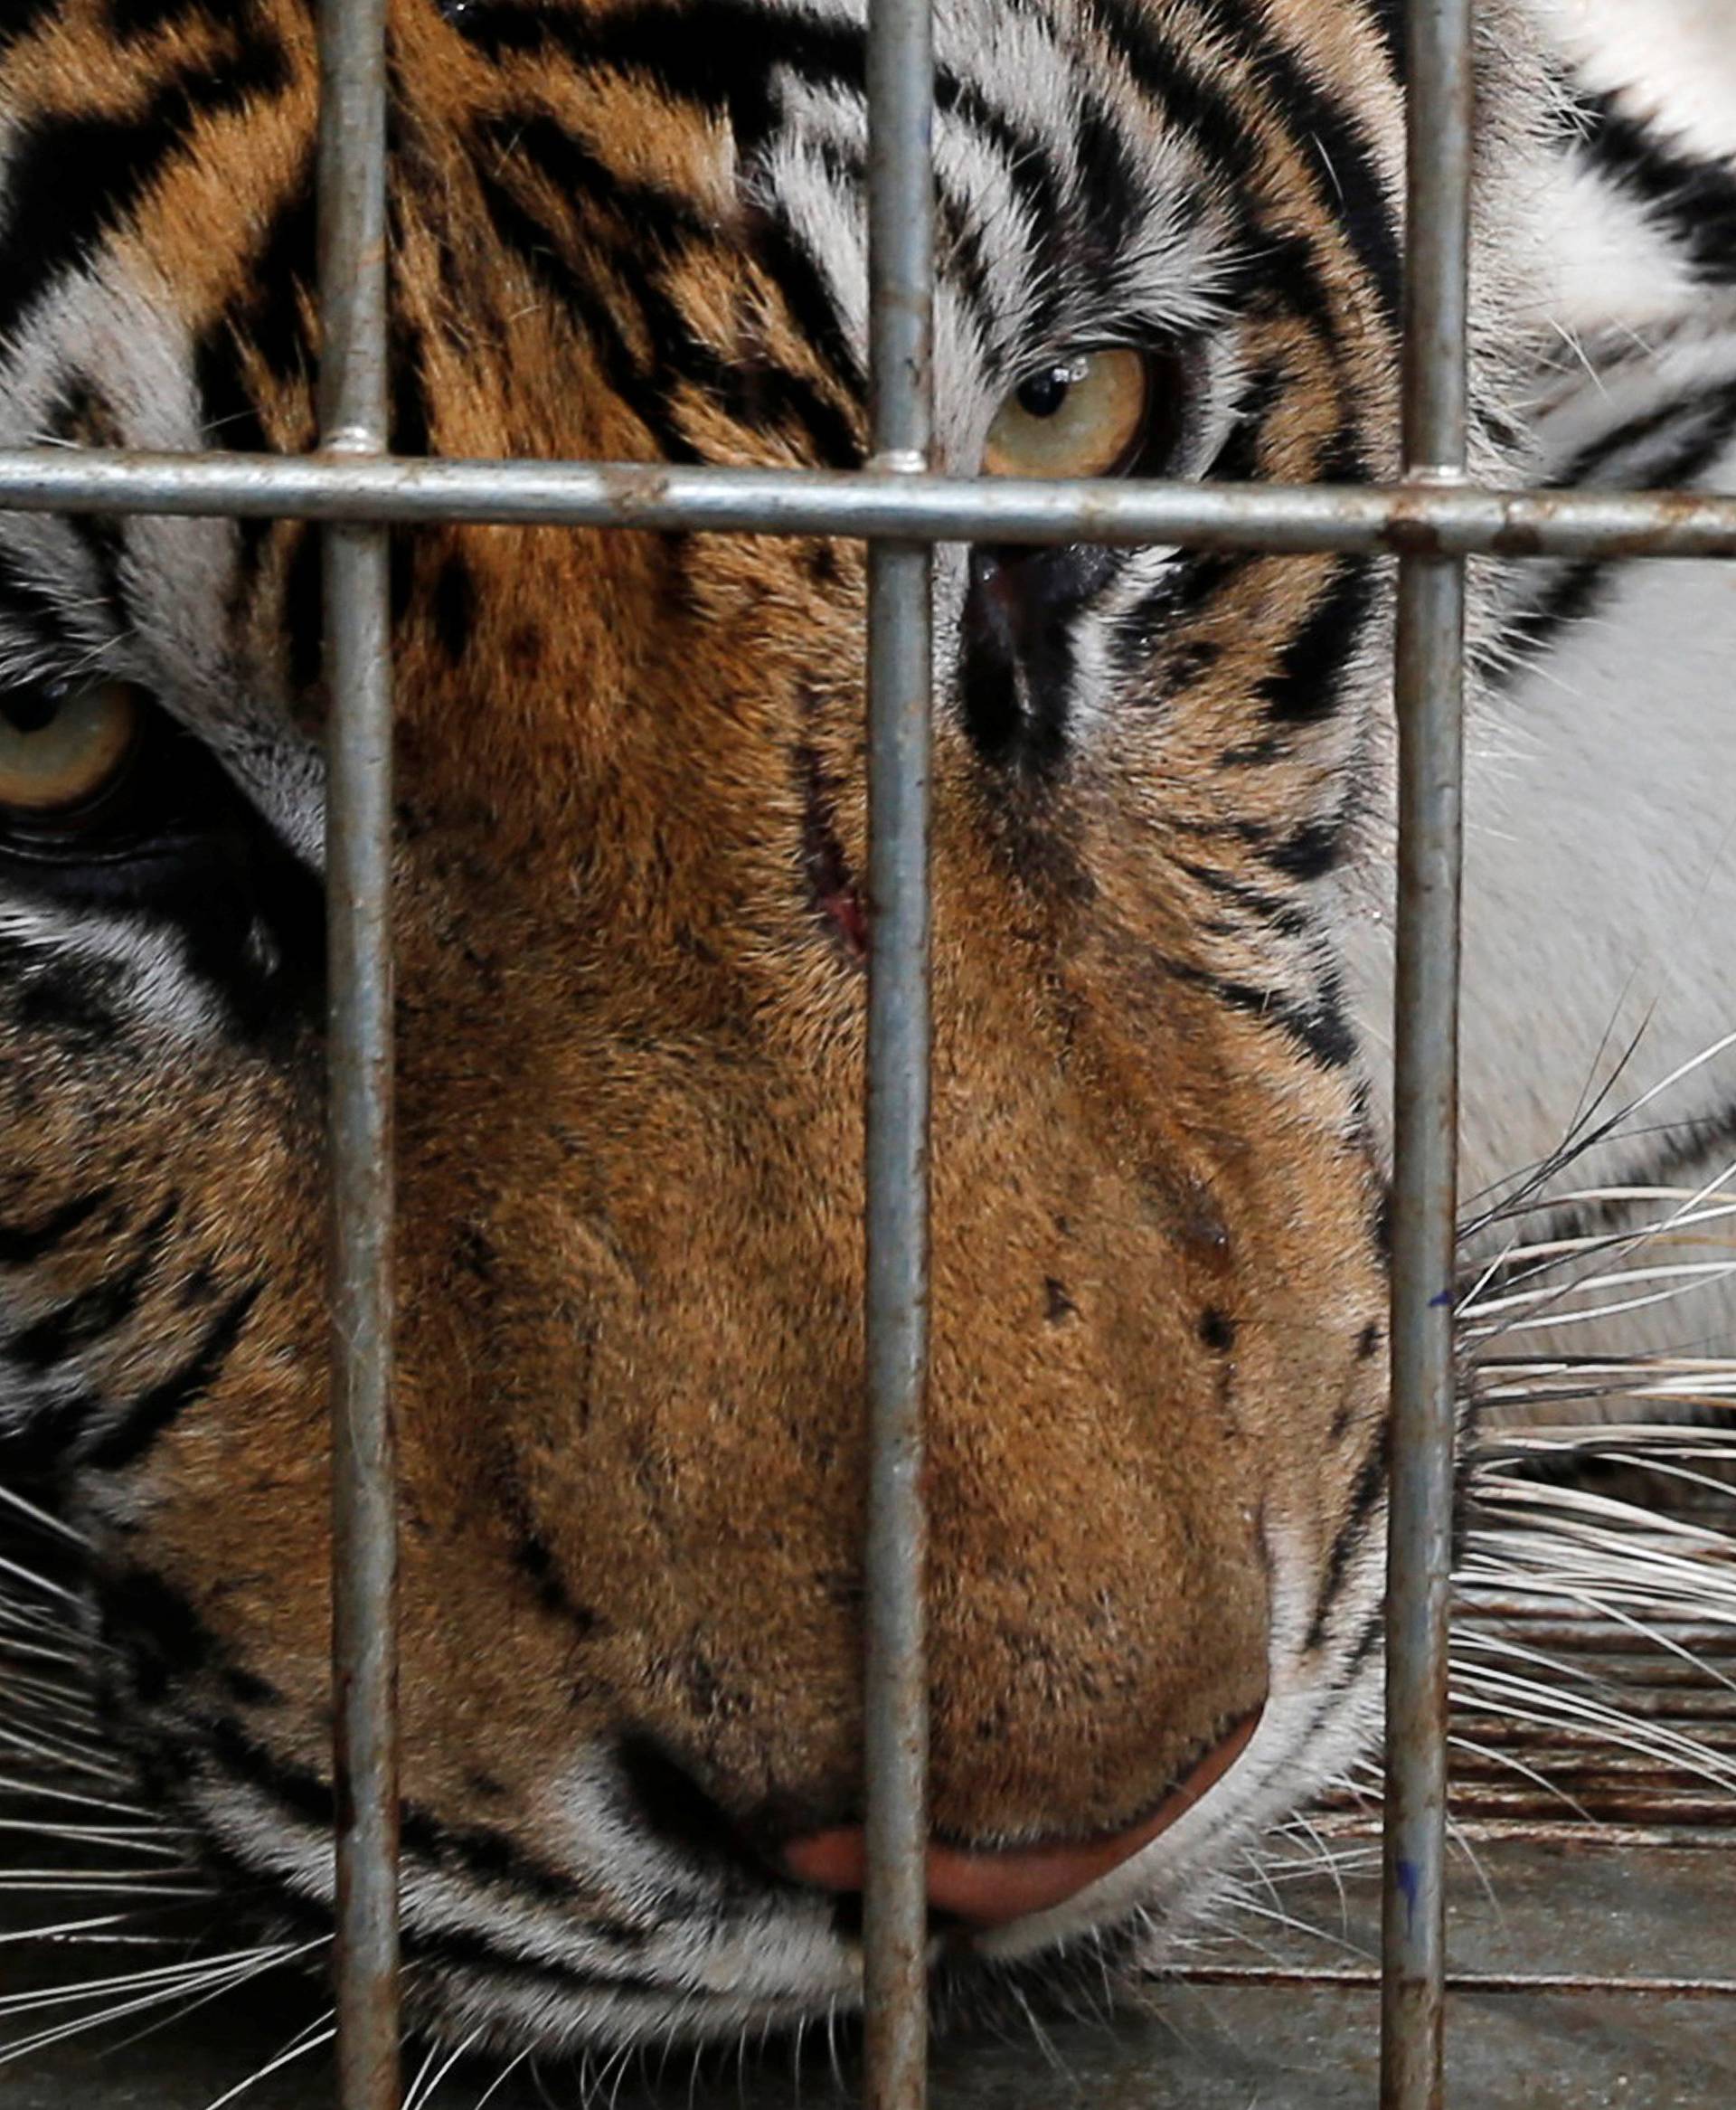 A tiger is seen in a cage as officials continue moving live tigers from the controversial Tiger Temple, in Kanchanaburi province